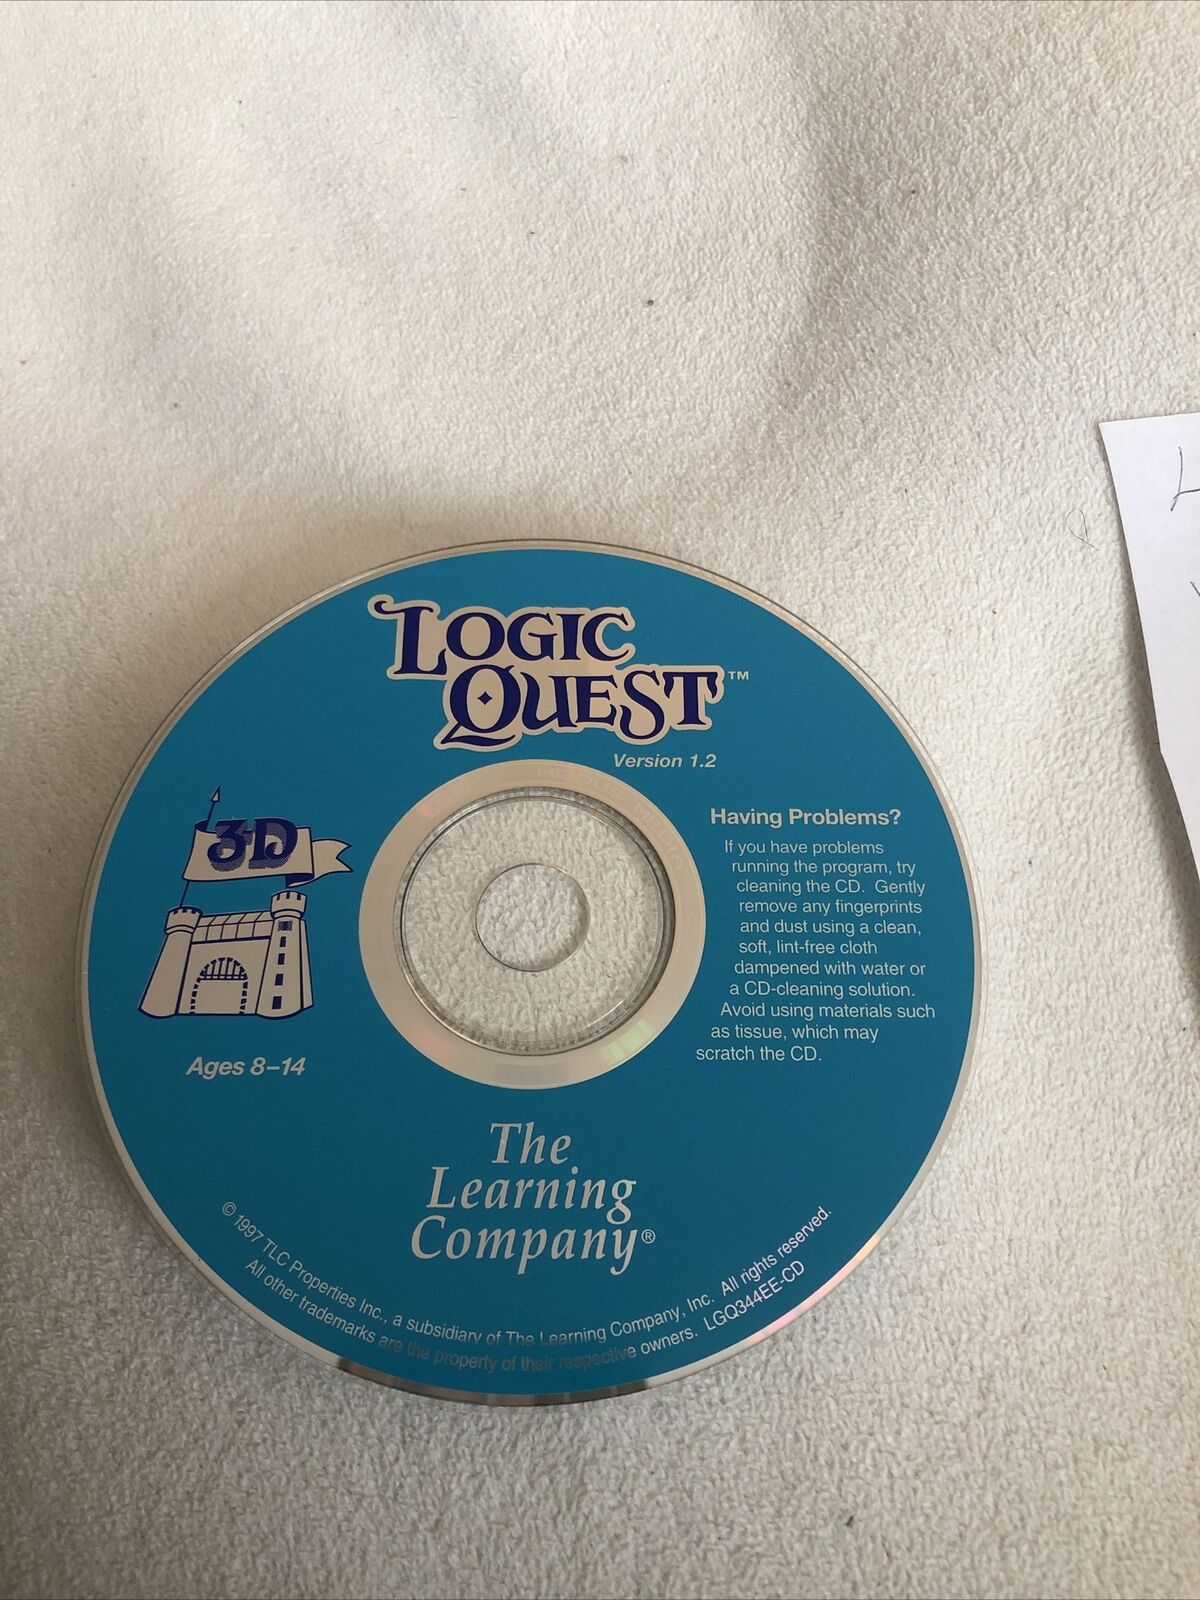 logic quest 3D version 1.2 the learning company PC CD Rom ‘97 